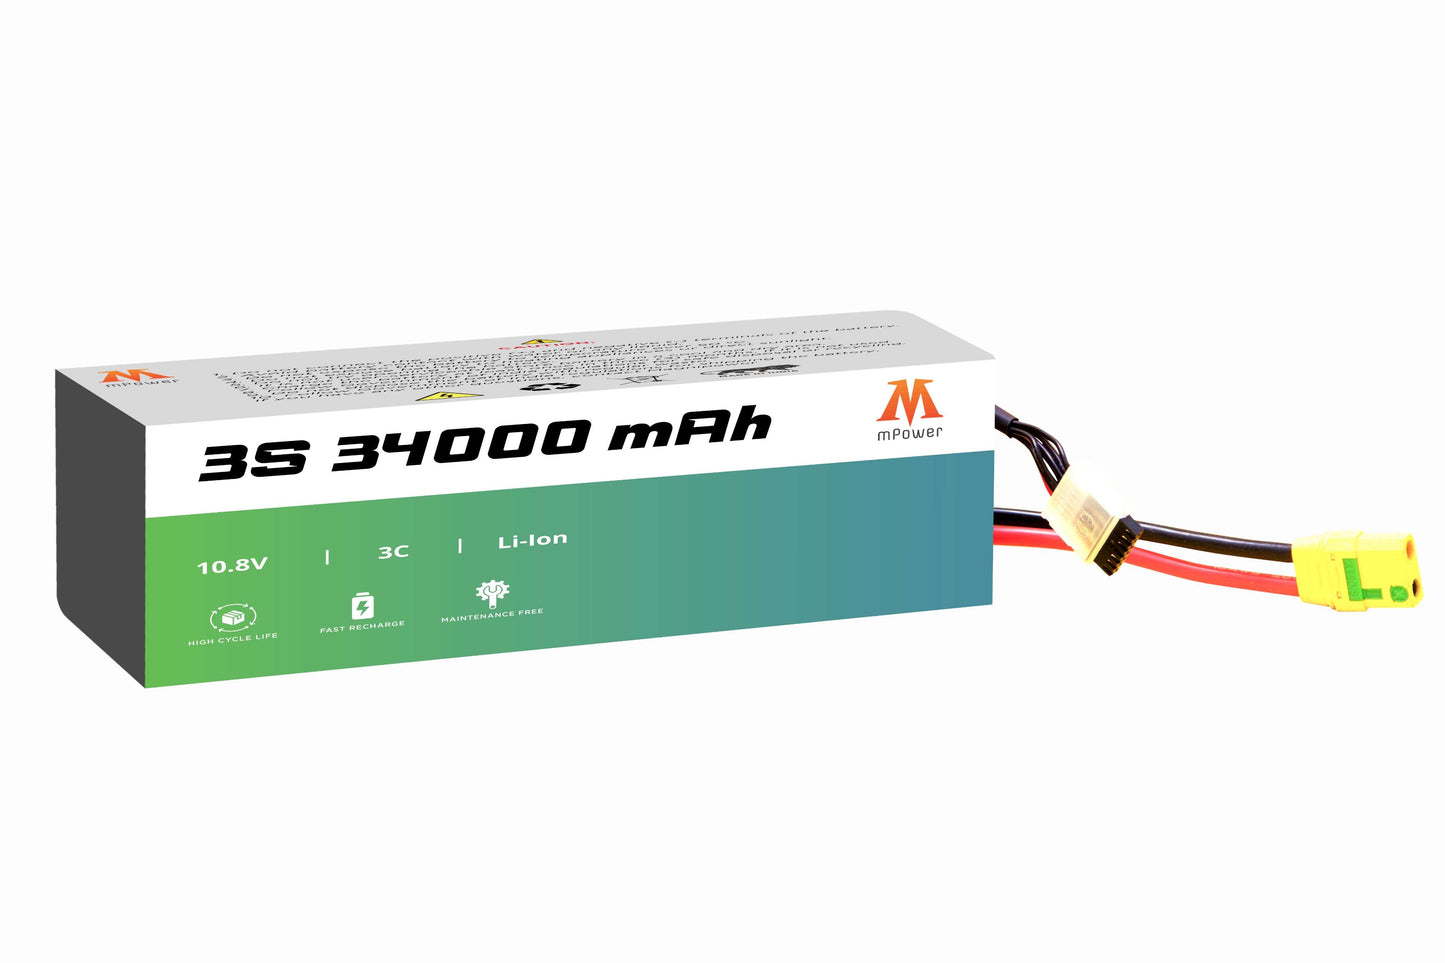 mPower 3S 34000mAh Lithium-Ion Battery for Survey Drones